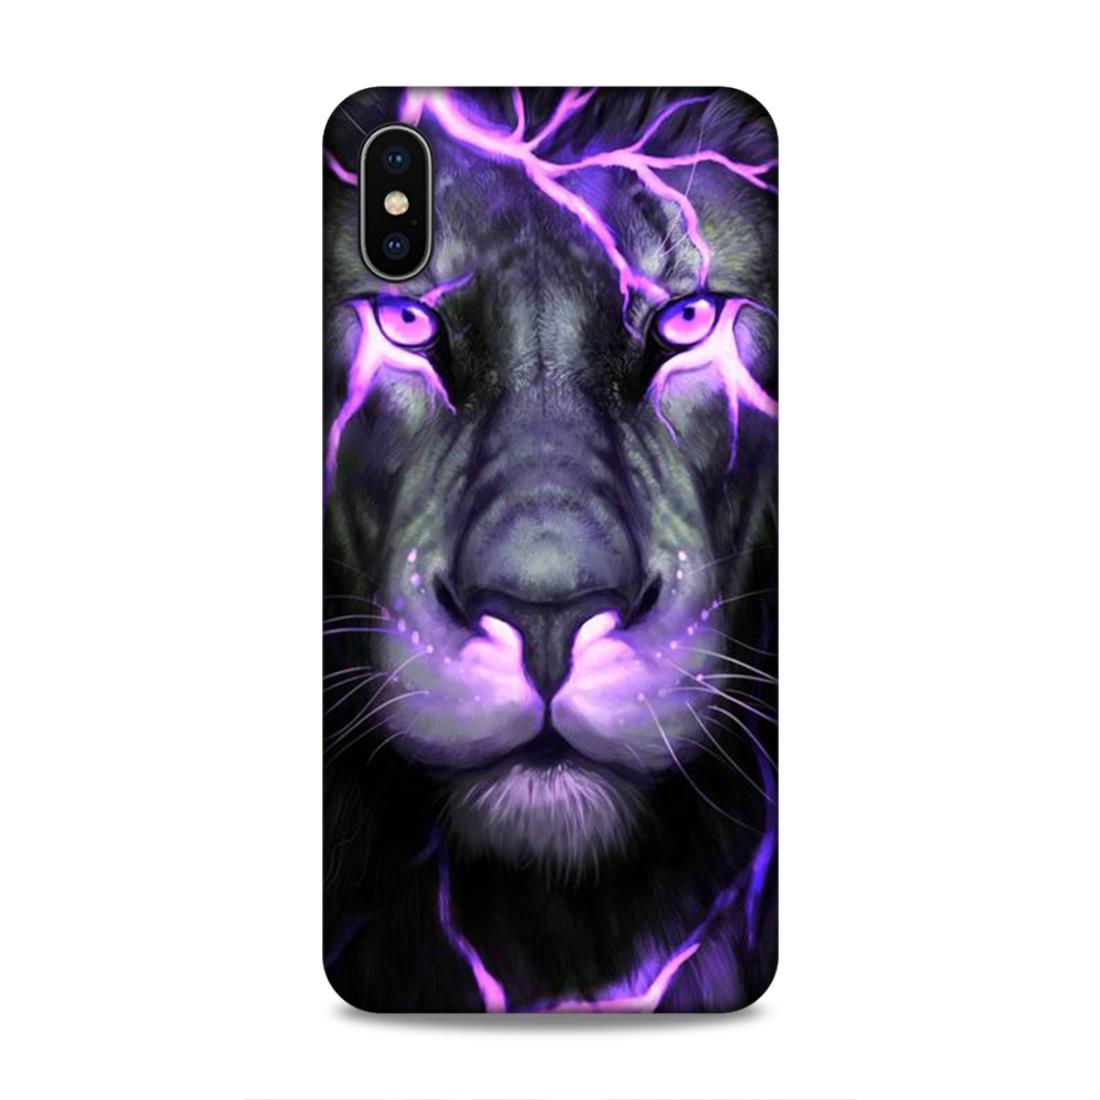 Lion Pattern iPhone XS Max Phone Cover Case